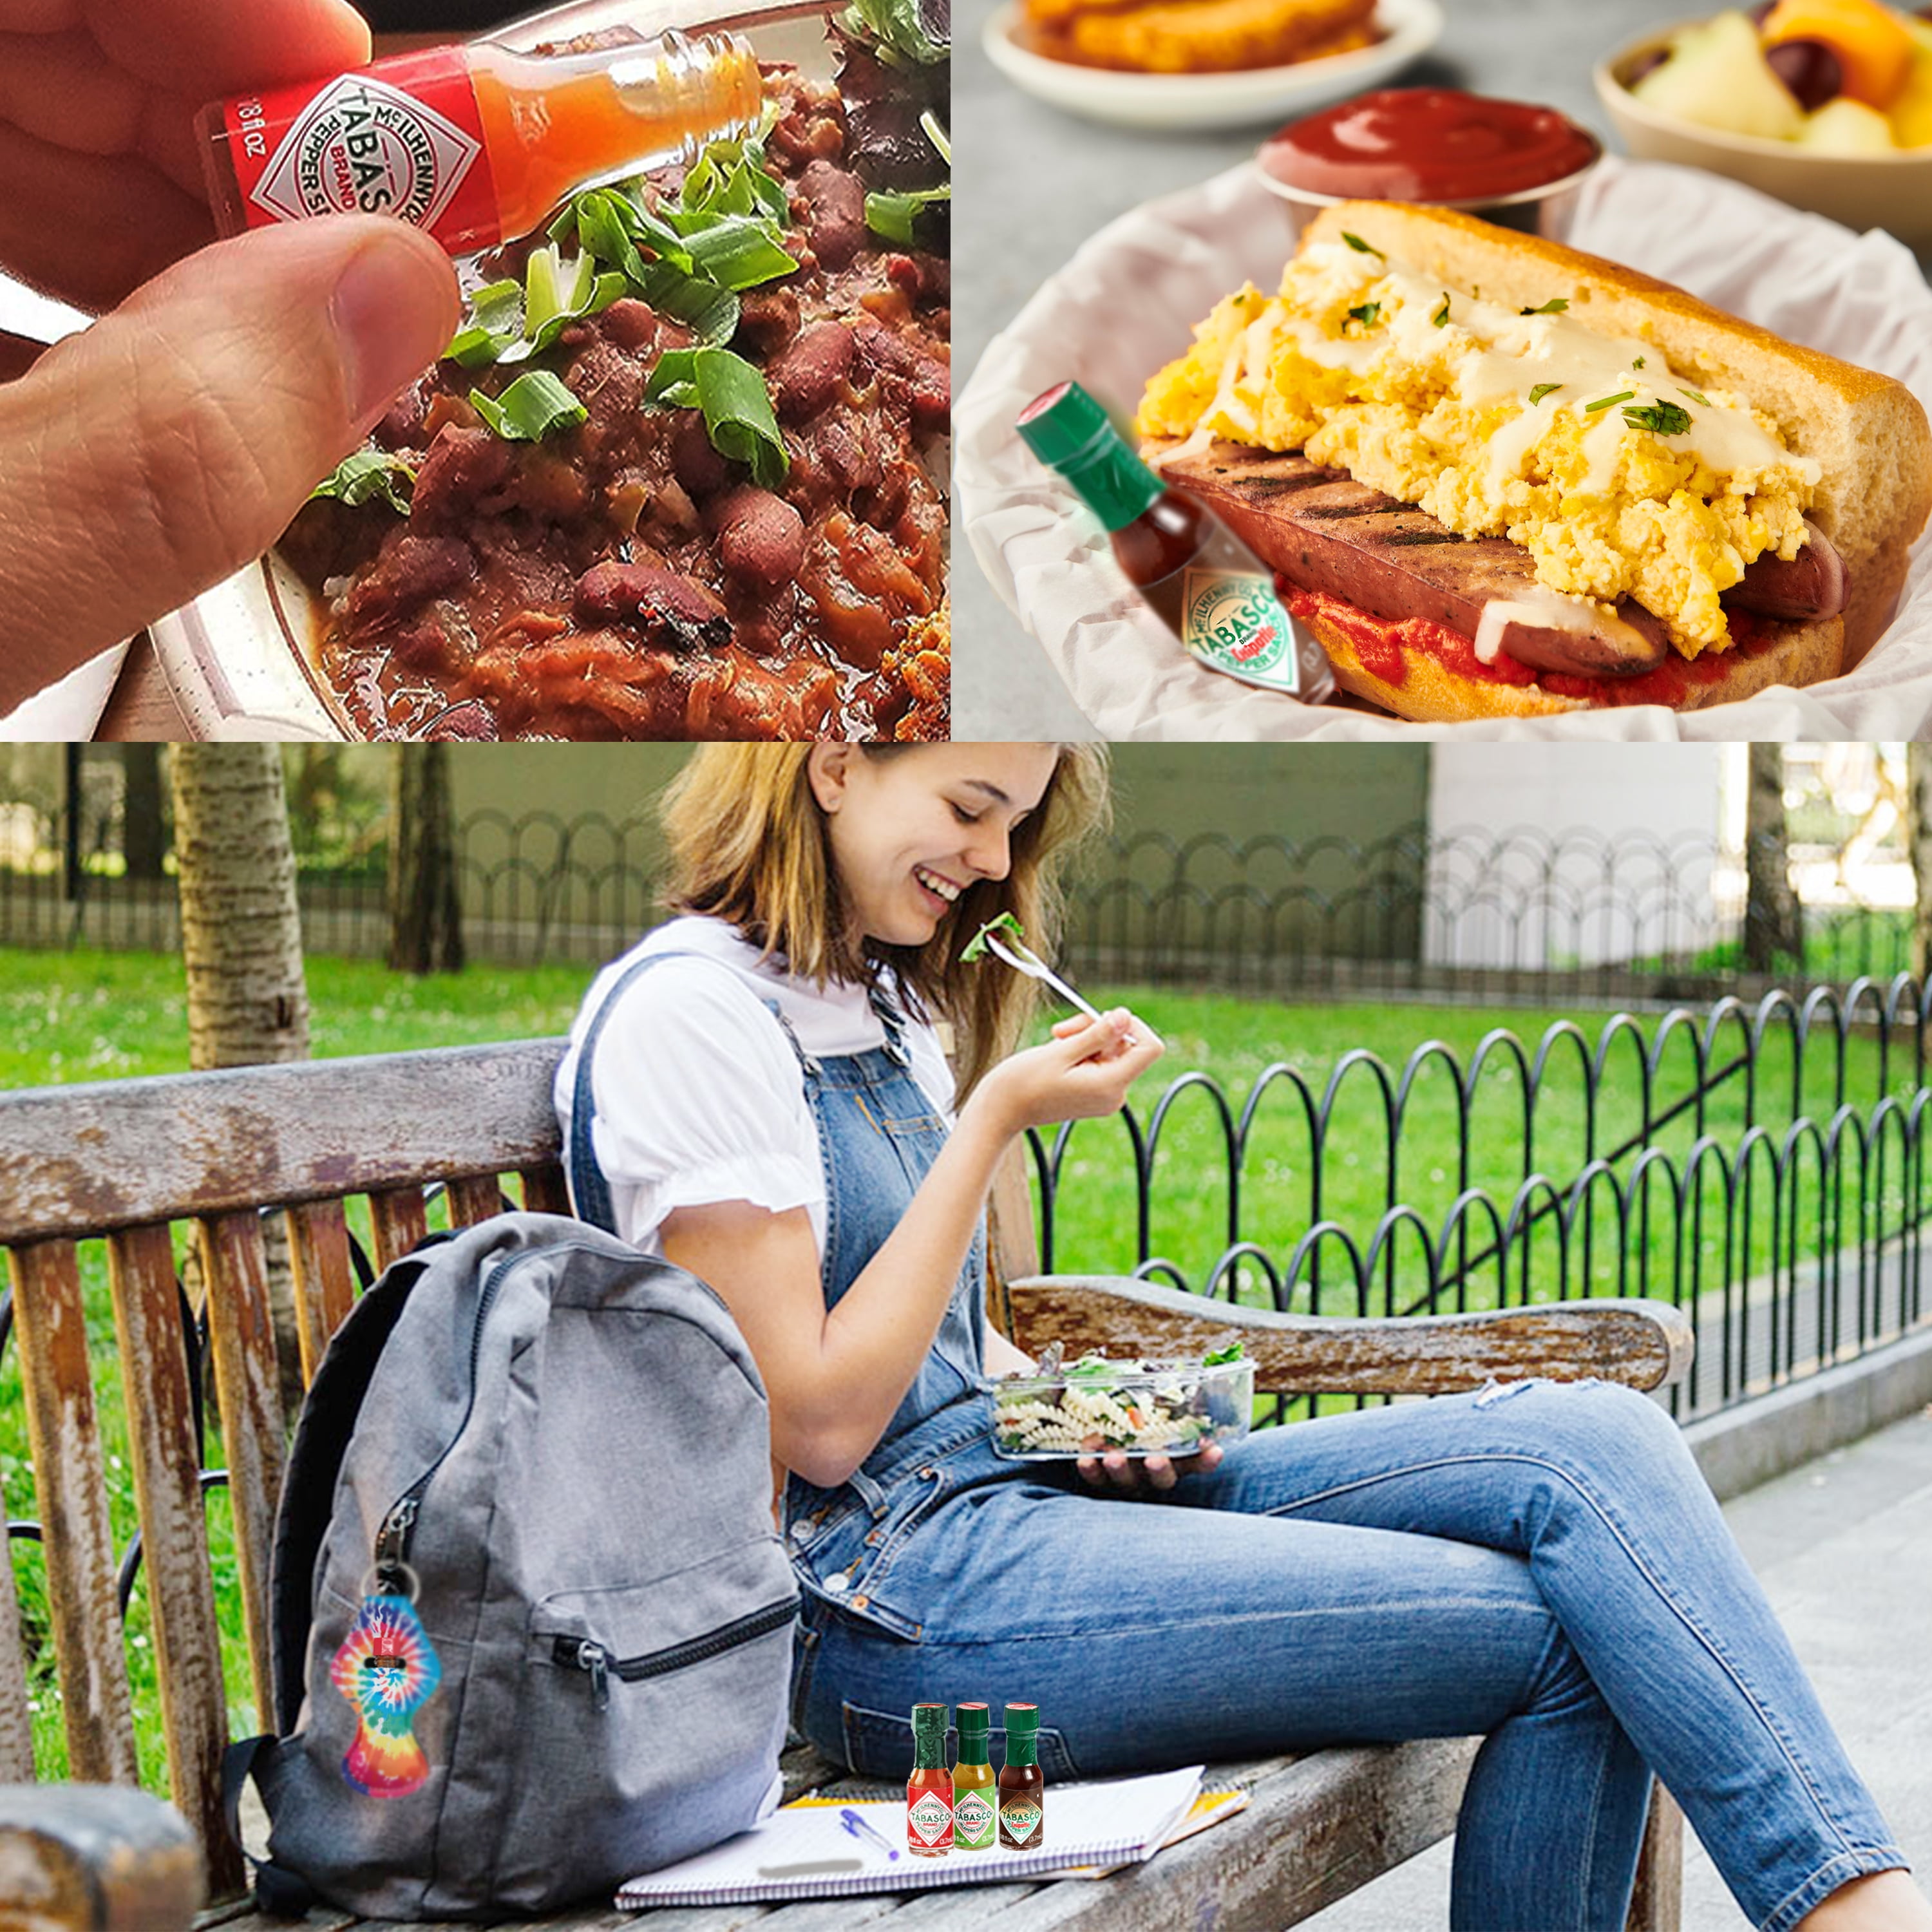 Tabasco Sauce Keychain Keyring Key Ring with Free Mini 1/8 oz Bottle of Original Hot Sauce Perfect for Pocket, Purse, or Travel, Women's, Size: One